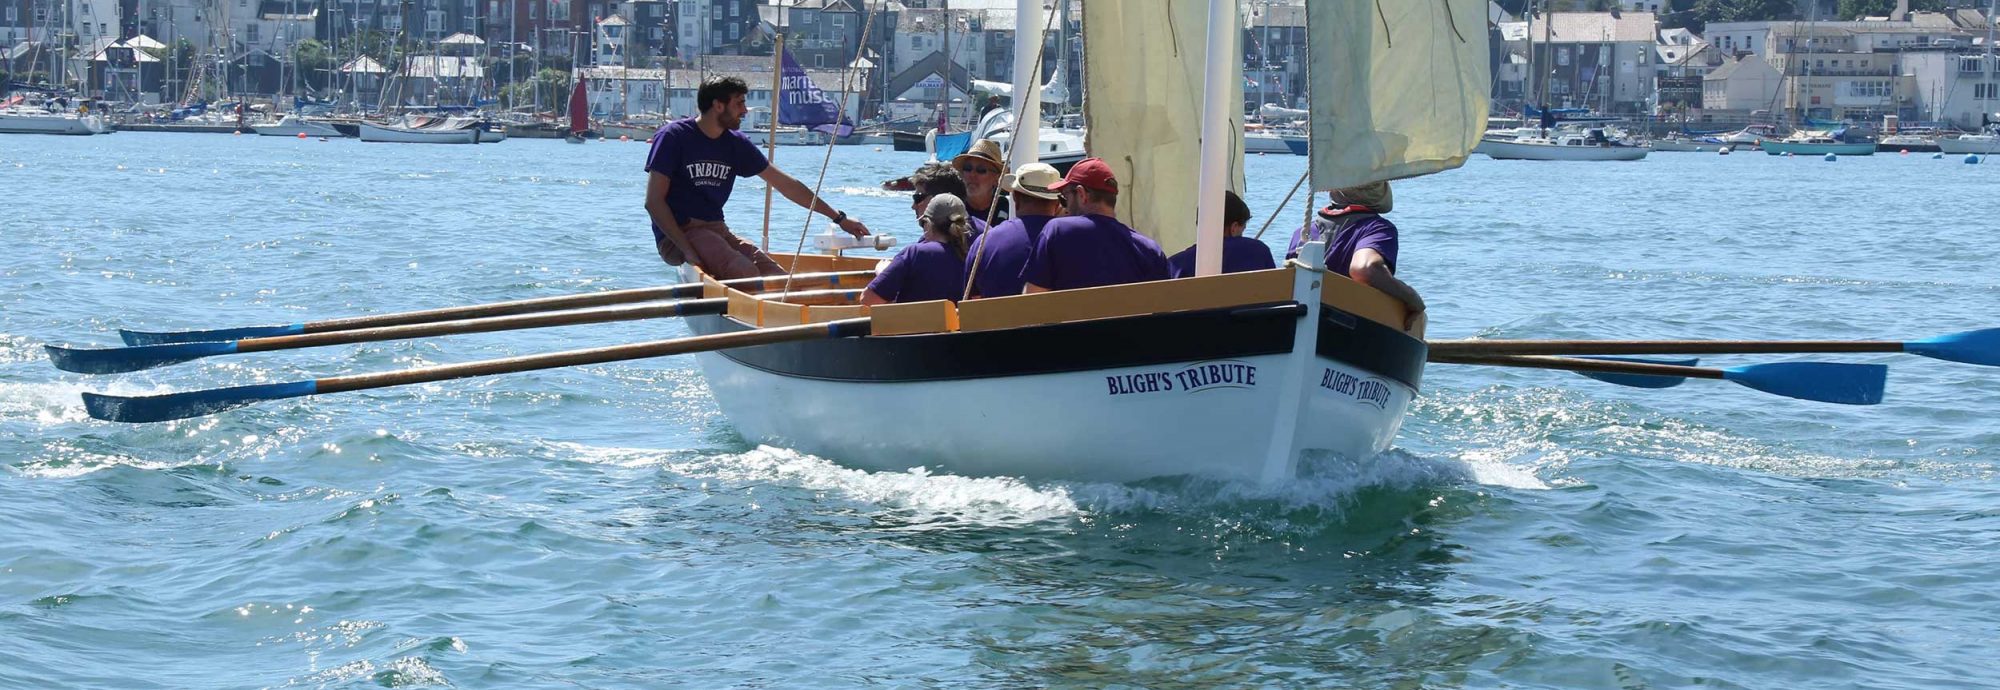 Photo of the 'Bligh's Tribute' boat, with its oars extended, making its way across Falmouth harbour.